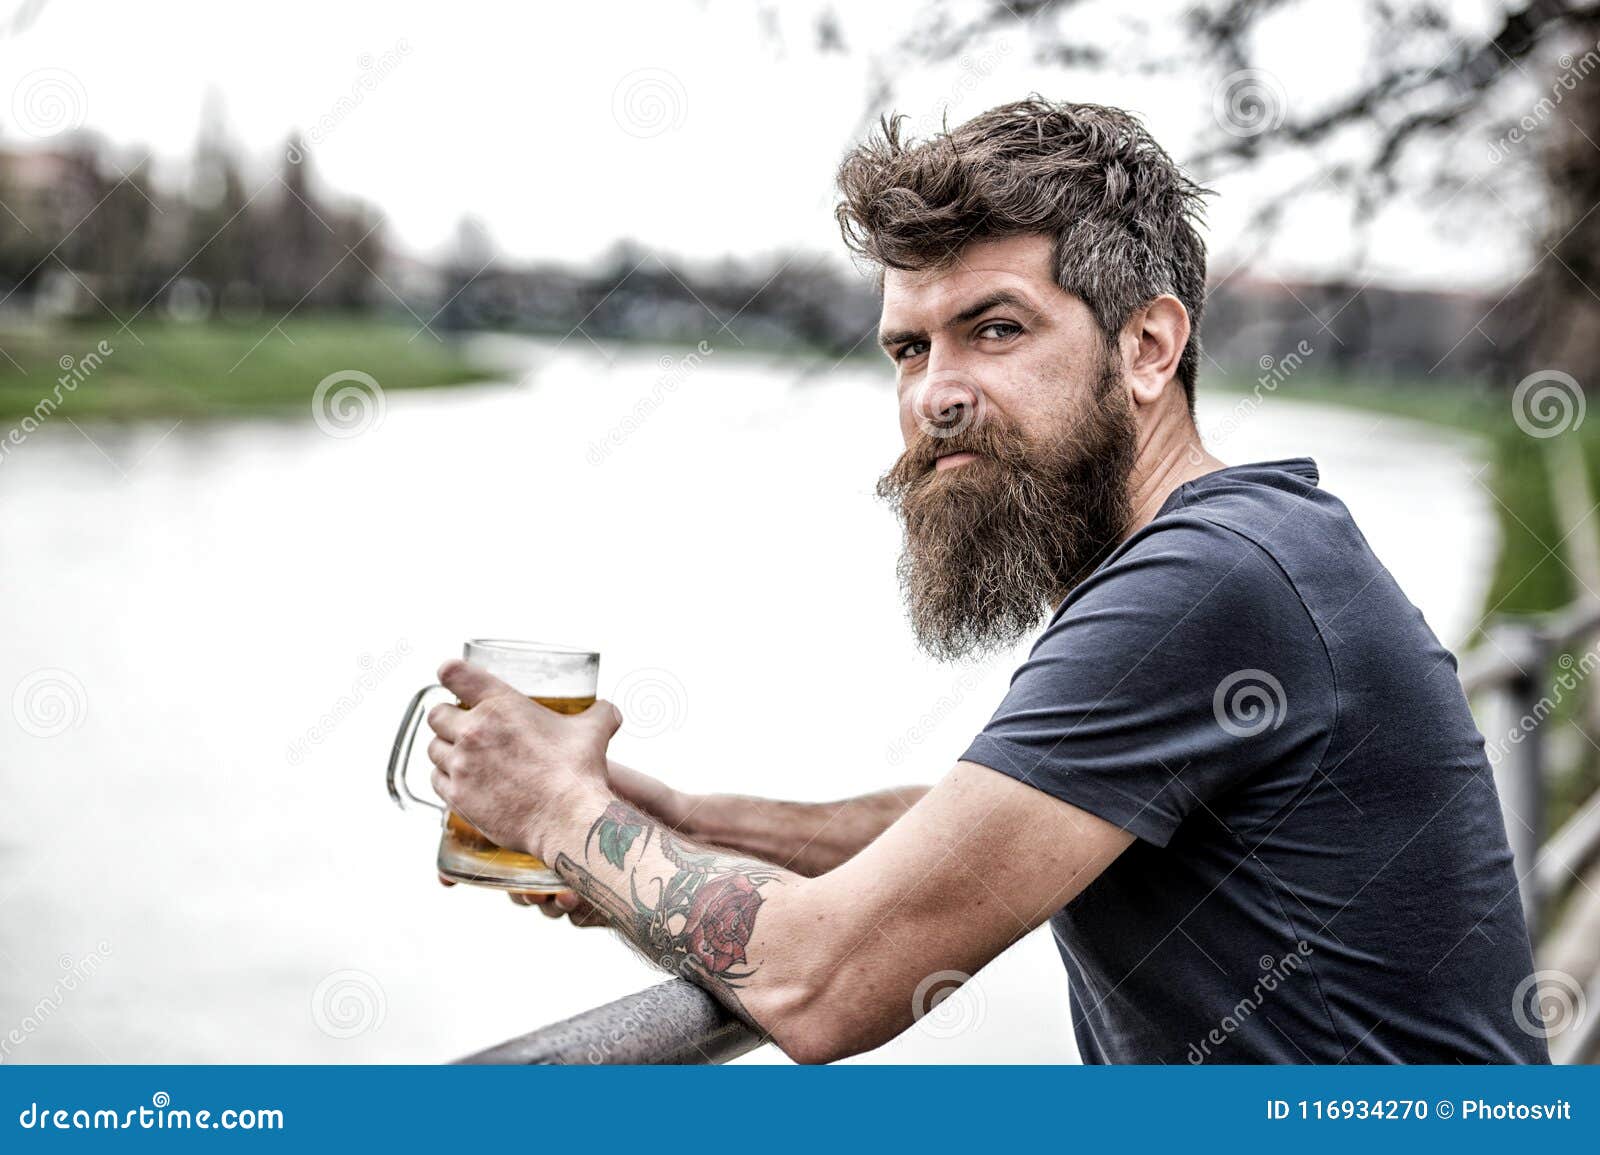 Side View Bearded Man Enjoying Big Mug of Beer on Warm Evening. Brutal Man  with Messy Hairstyle and Tattooed Arm Having Stock Photo - Image of  brewery, hairstyle: 116934270